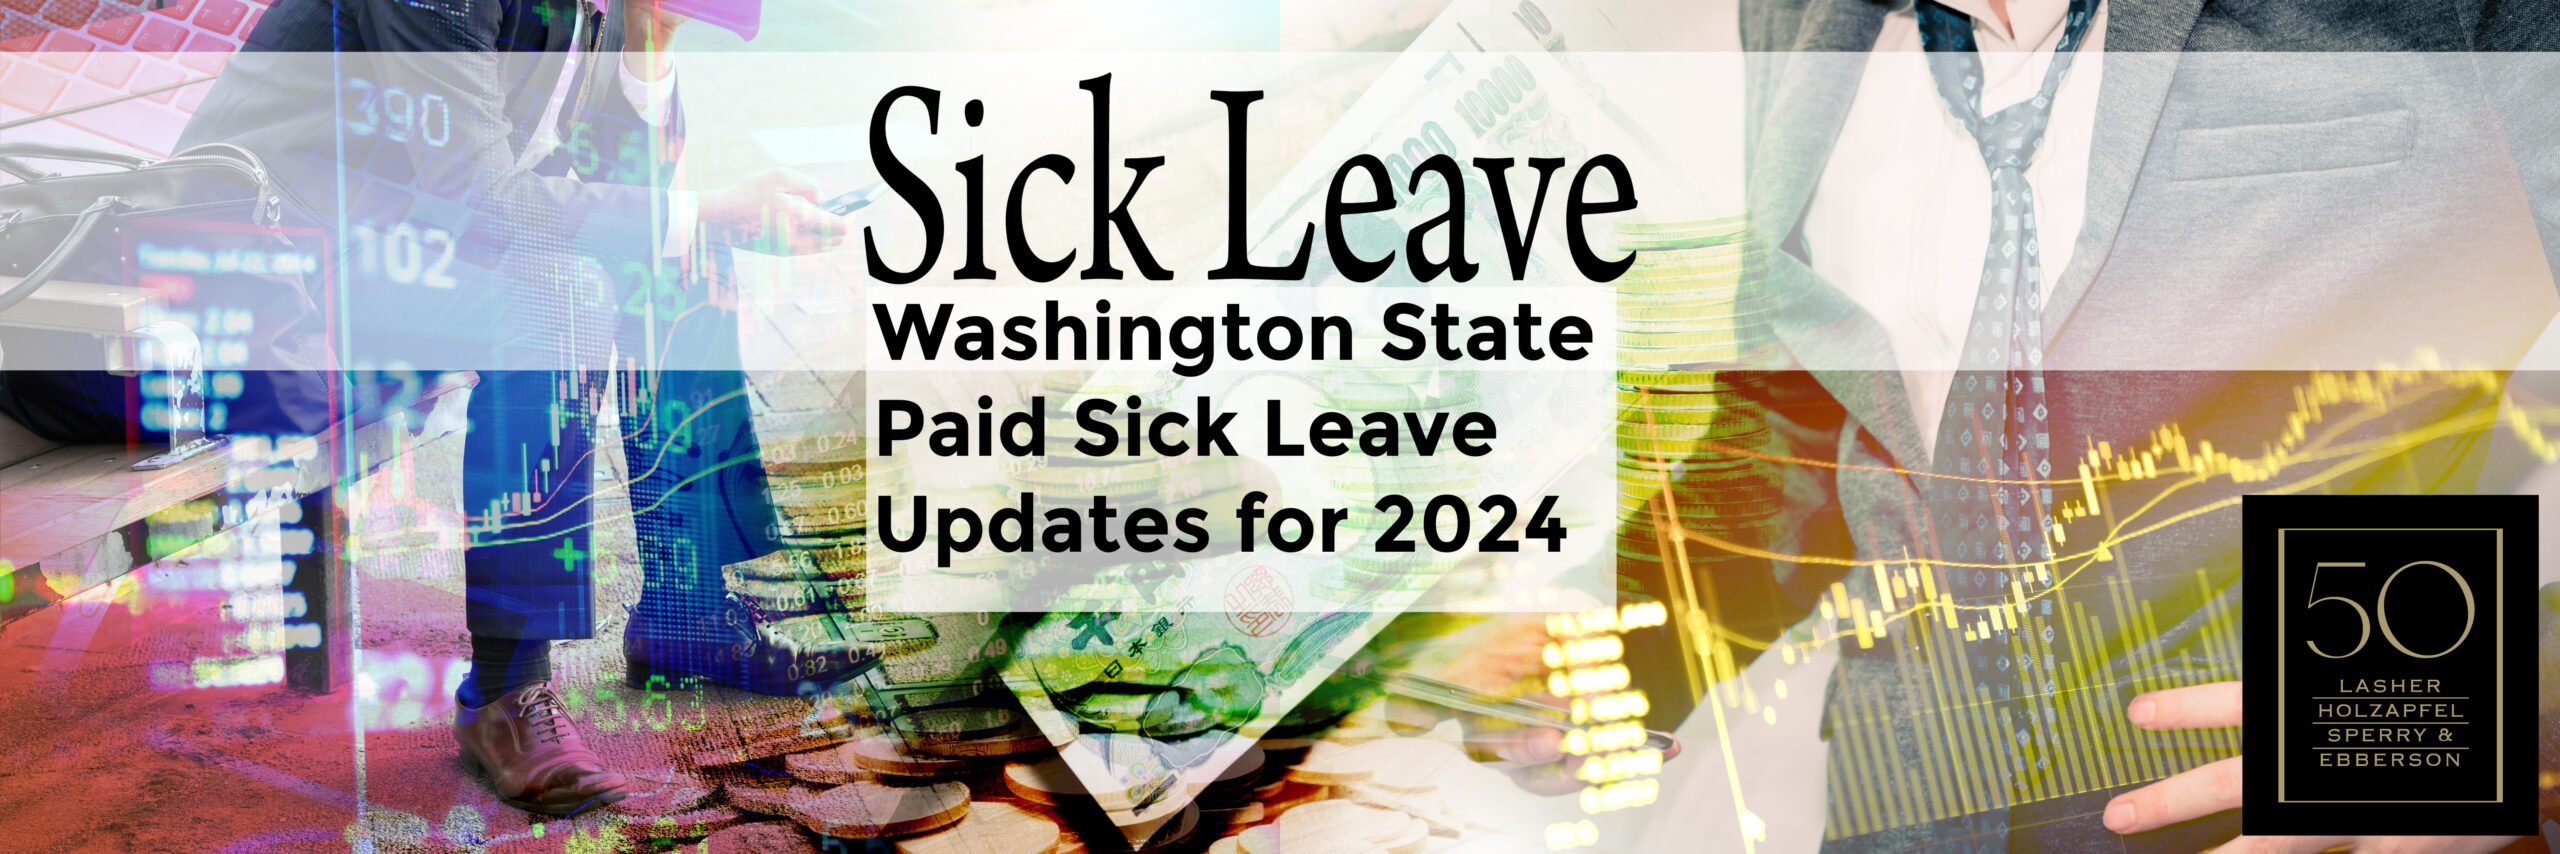 Washington State Paid Sick Leave Updates for 2024